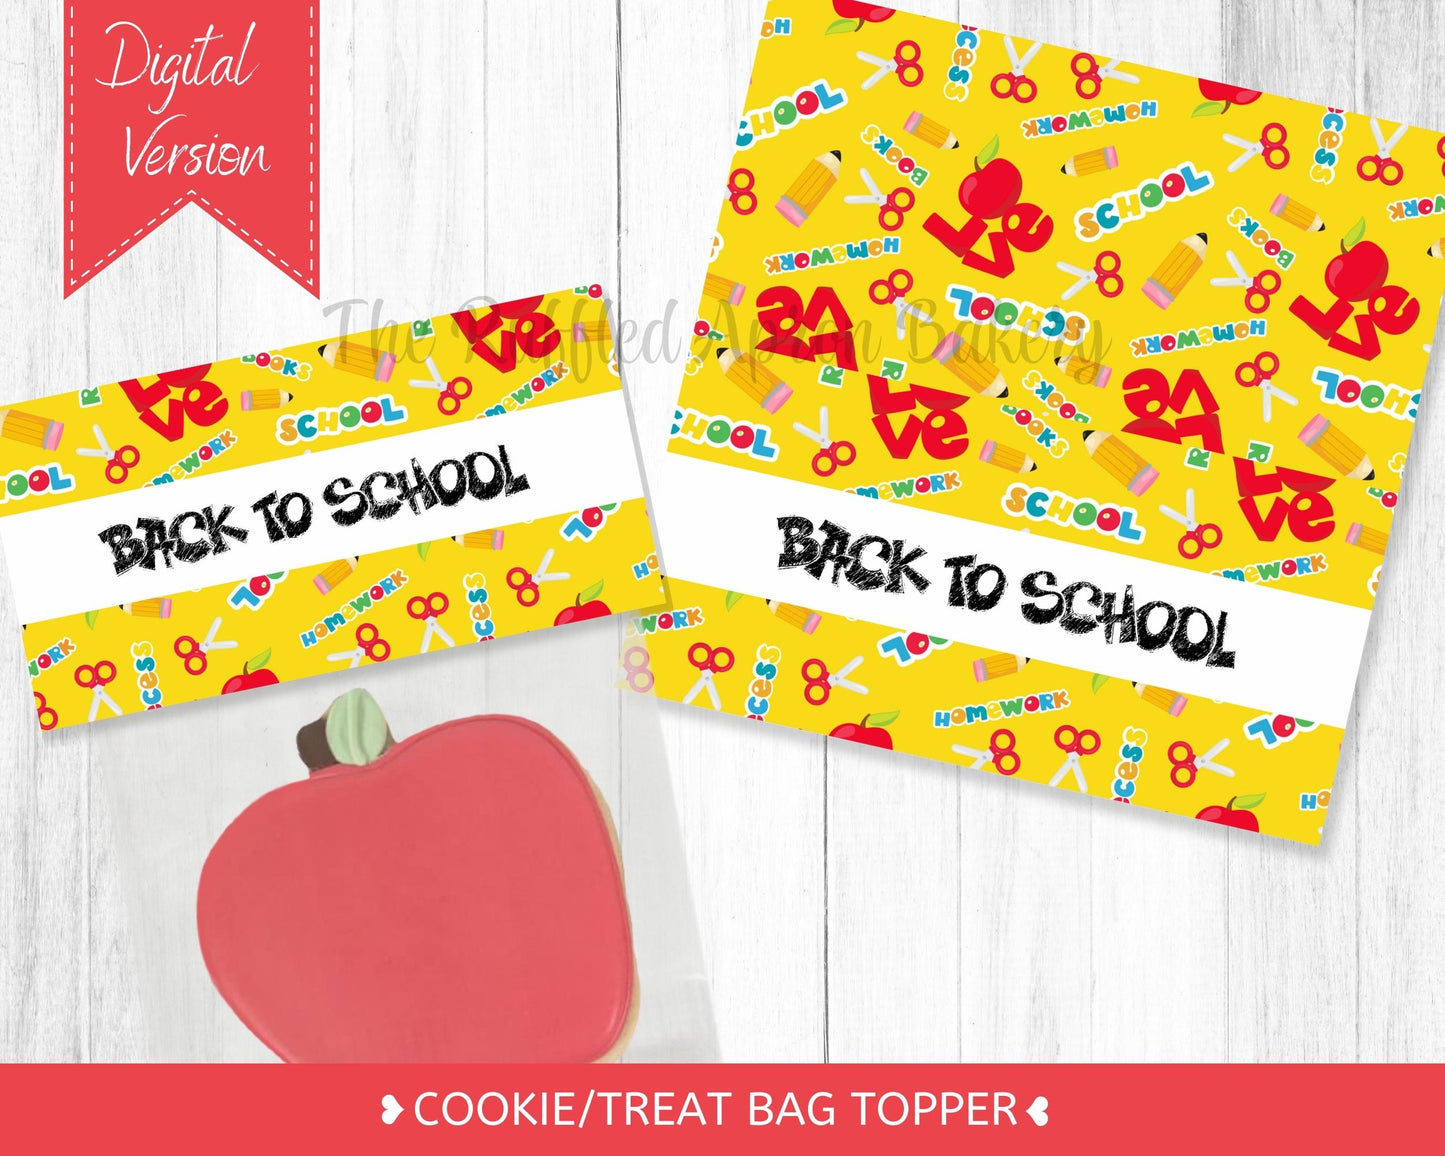 Back to School Cookie Bag Topper